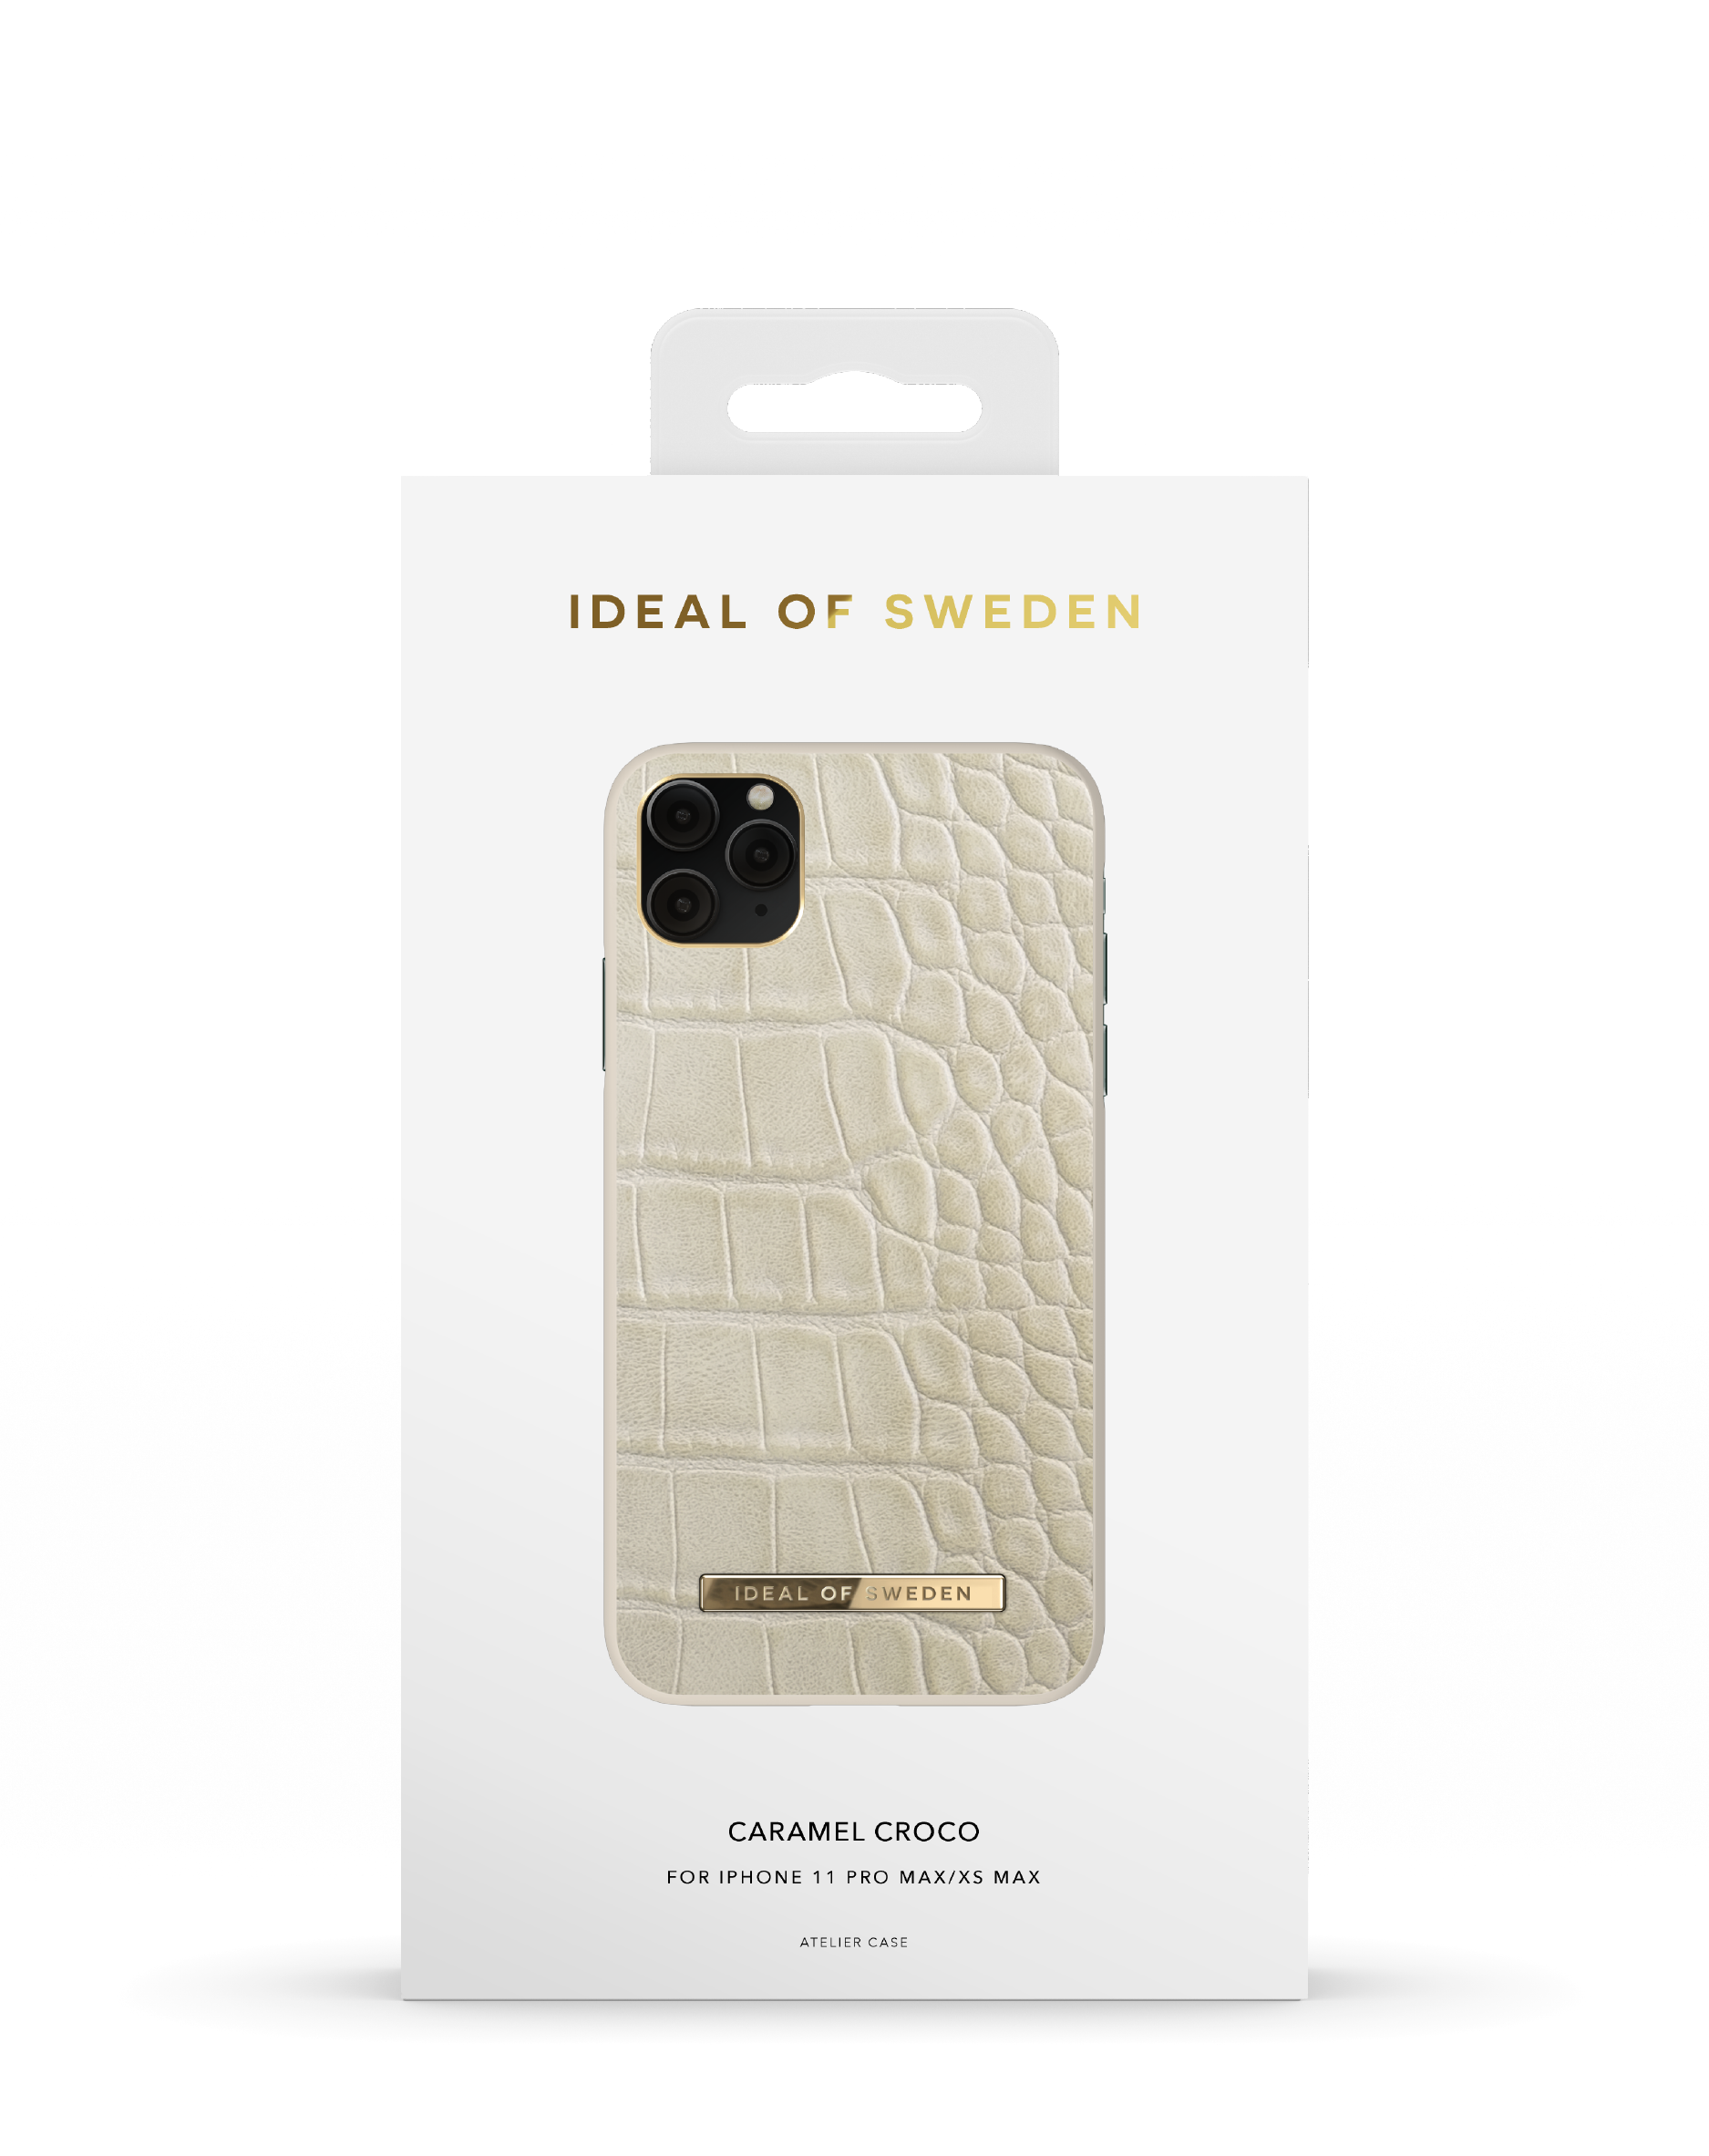 IDEAL OF SWEDEN IDACAW20-1965-243, Backcover, Max, Pro iPhone Max, 11 Apple, Caramel XS iPhone Apple Croco Apple